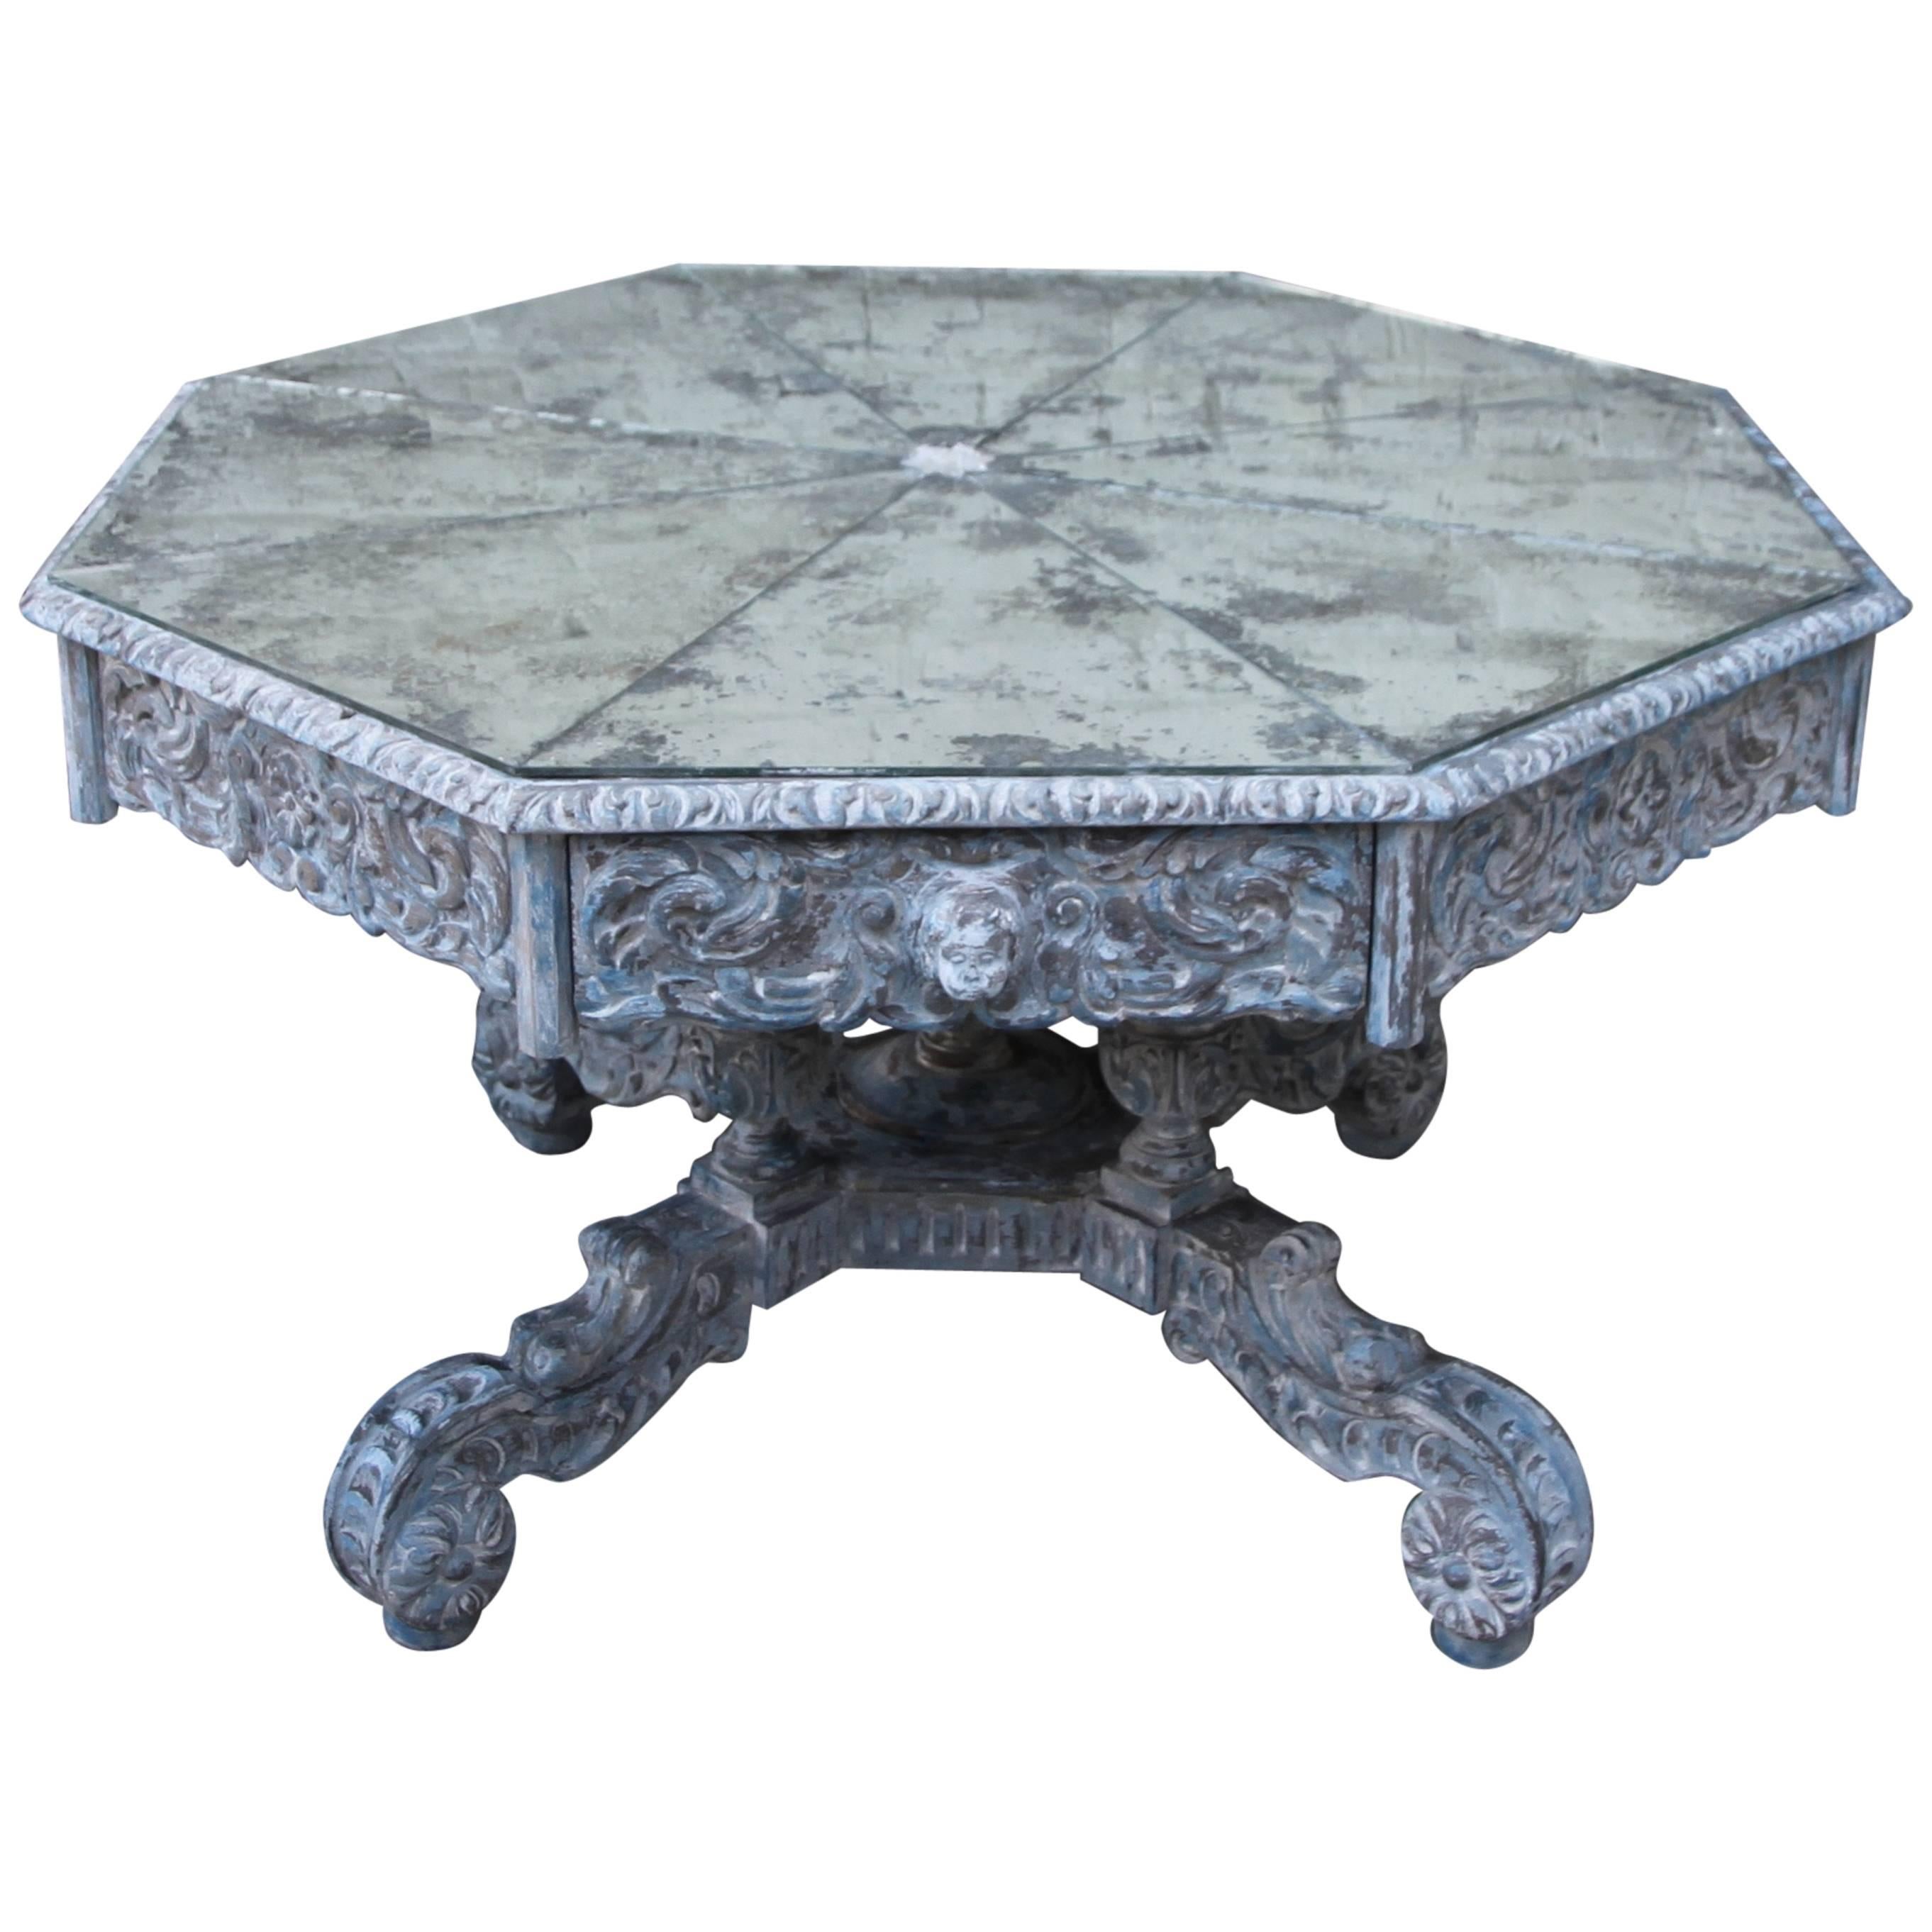 Octagonal Painted Centre or Dining Table with Mirrored Top